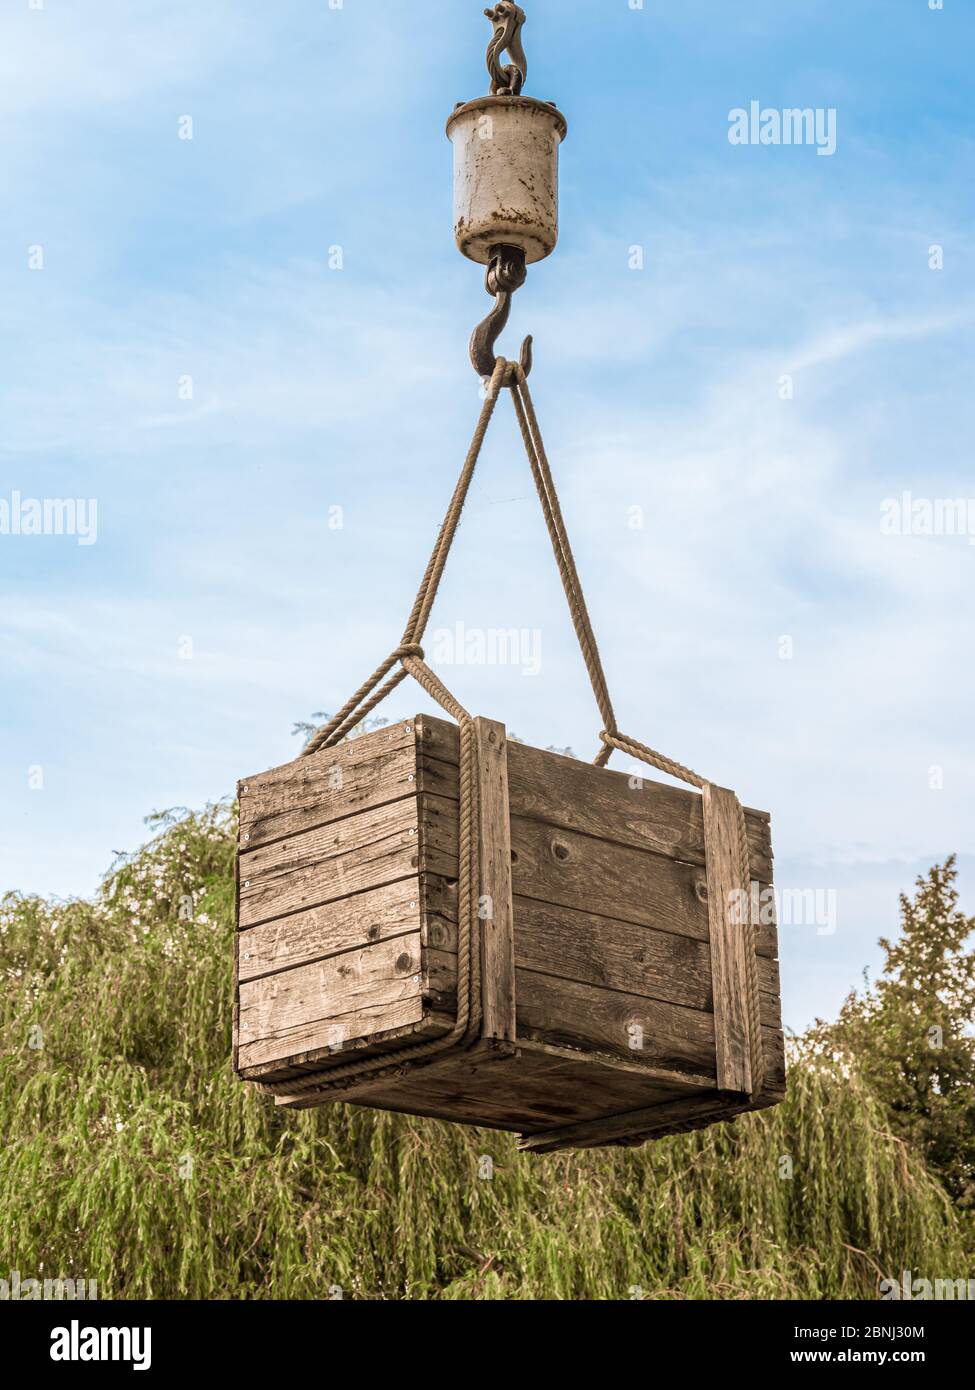 Wooden box hanging on the hook of a crane. Stock Photo